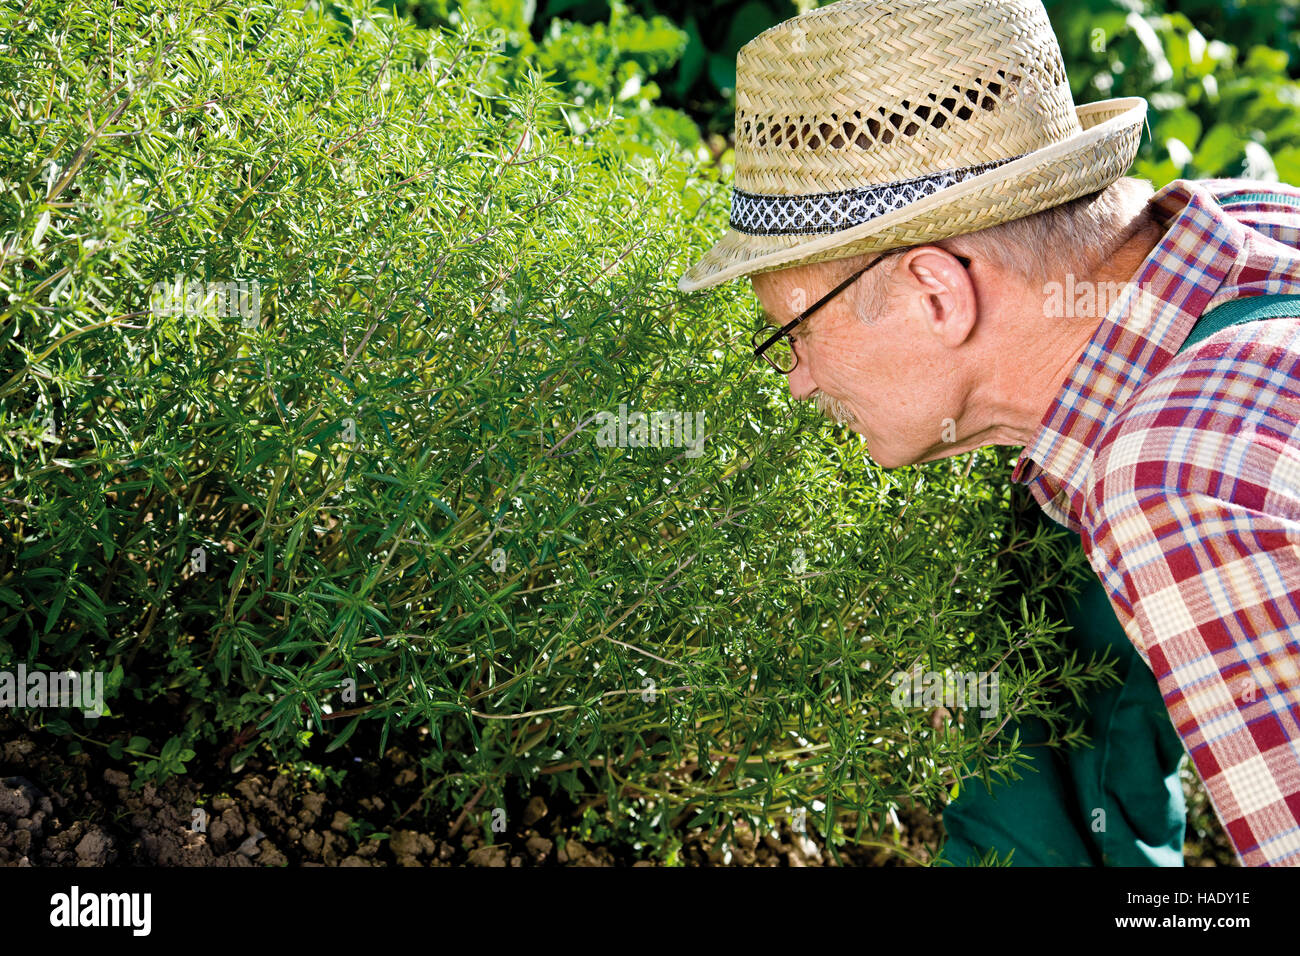 Gardener in front of his fragrant savory patch Stock Photo